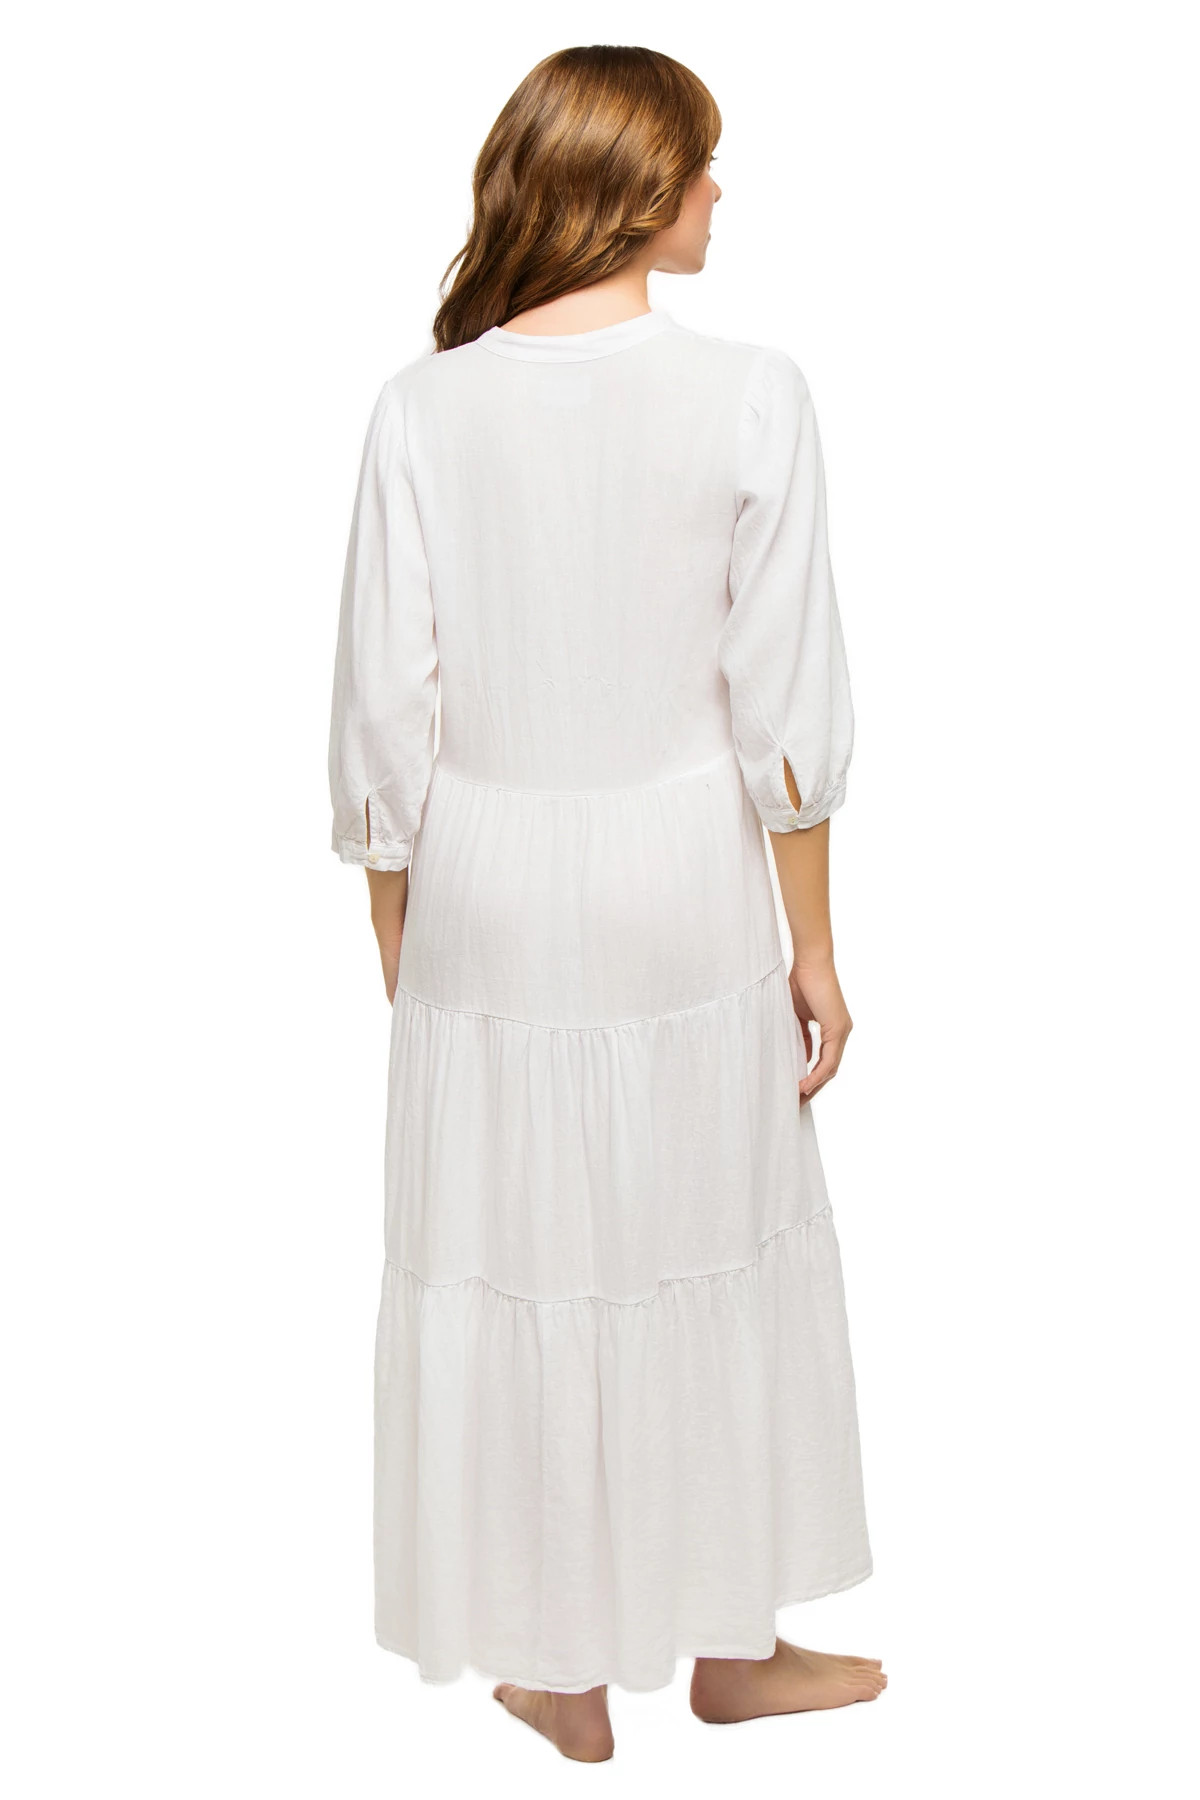 WHITE Jacquie Dress image number 2